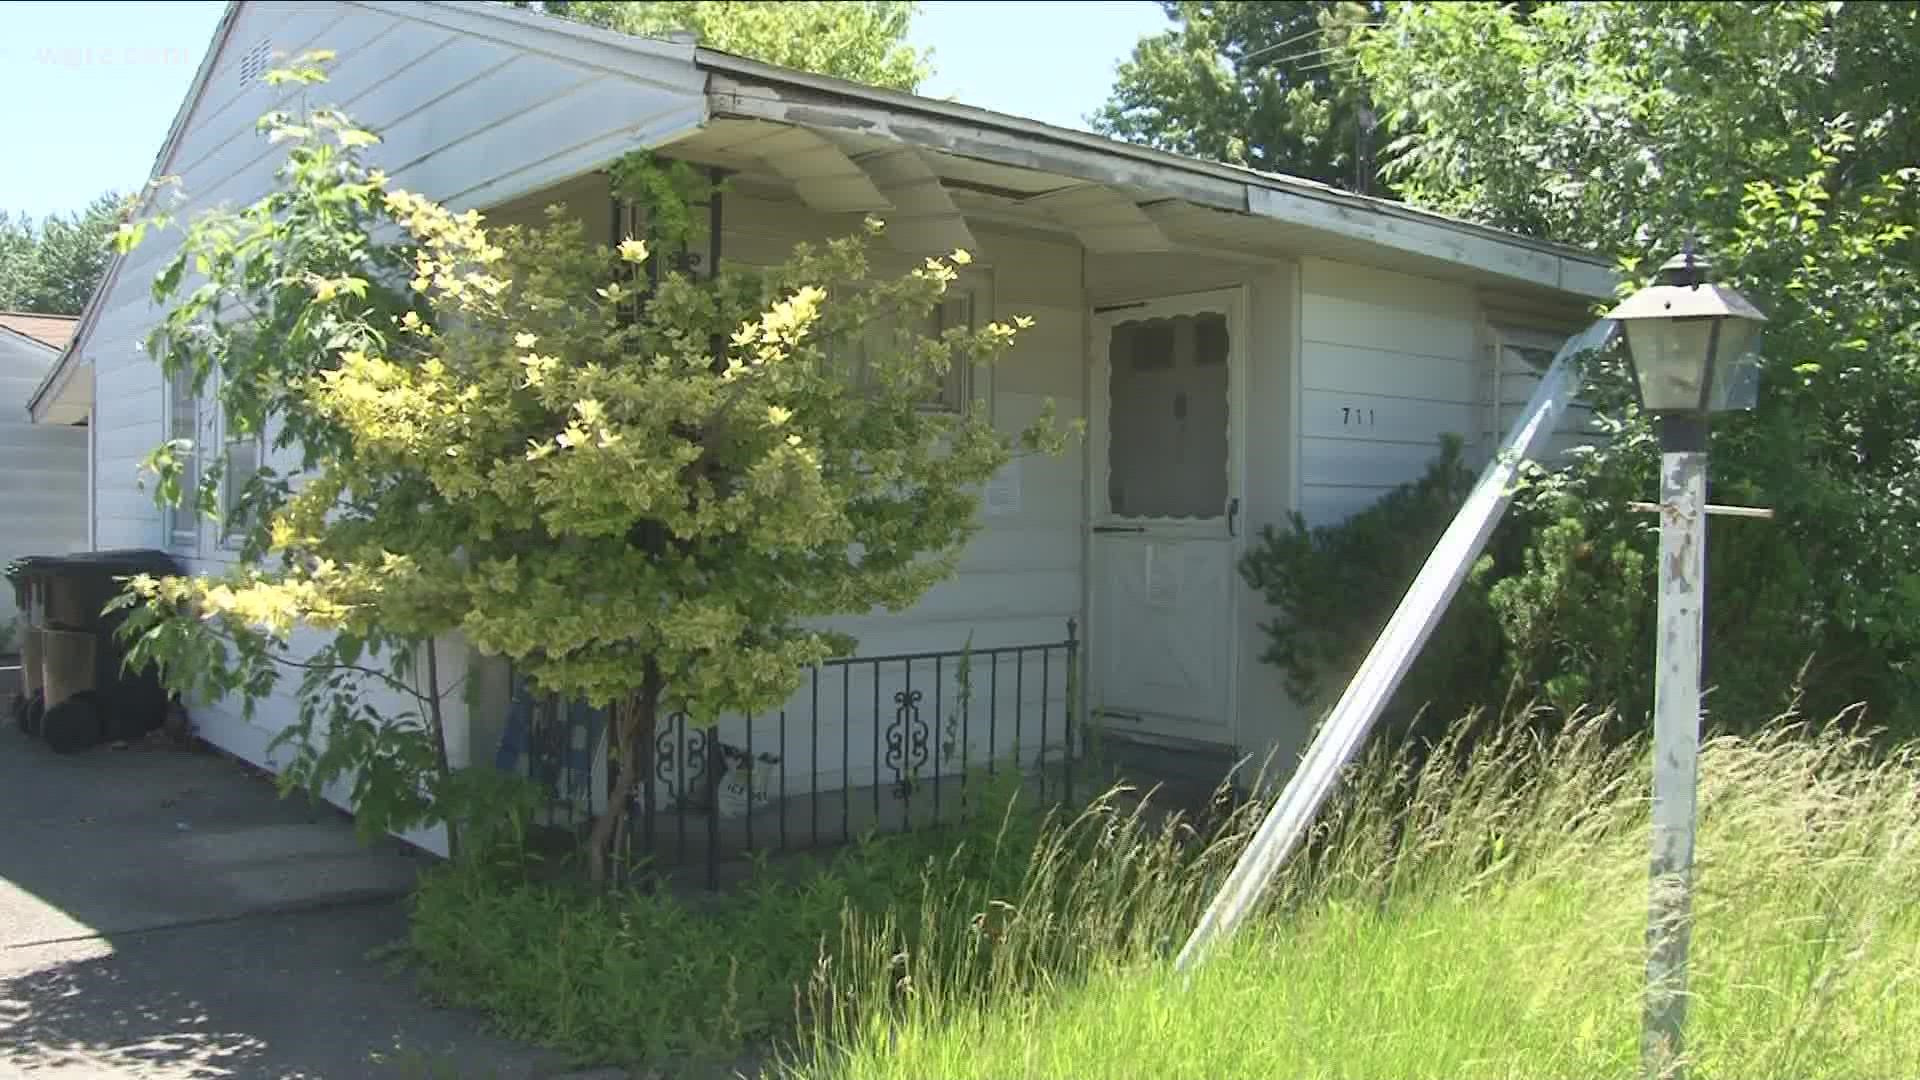 An abandoned home in the Town of Tonawanda is frustrating neighbors. It's all because of the home's appearance and the pests the property is now attracting.